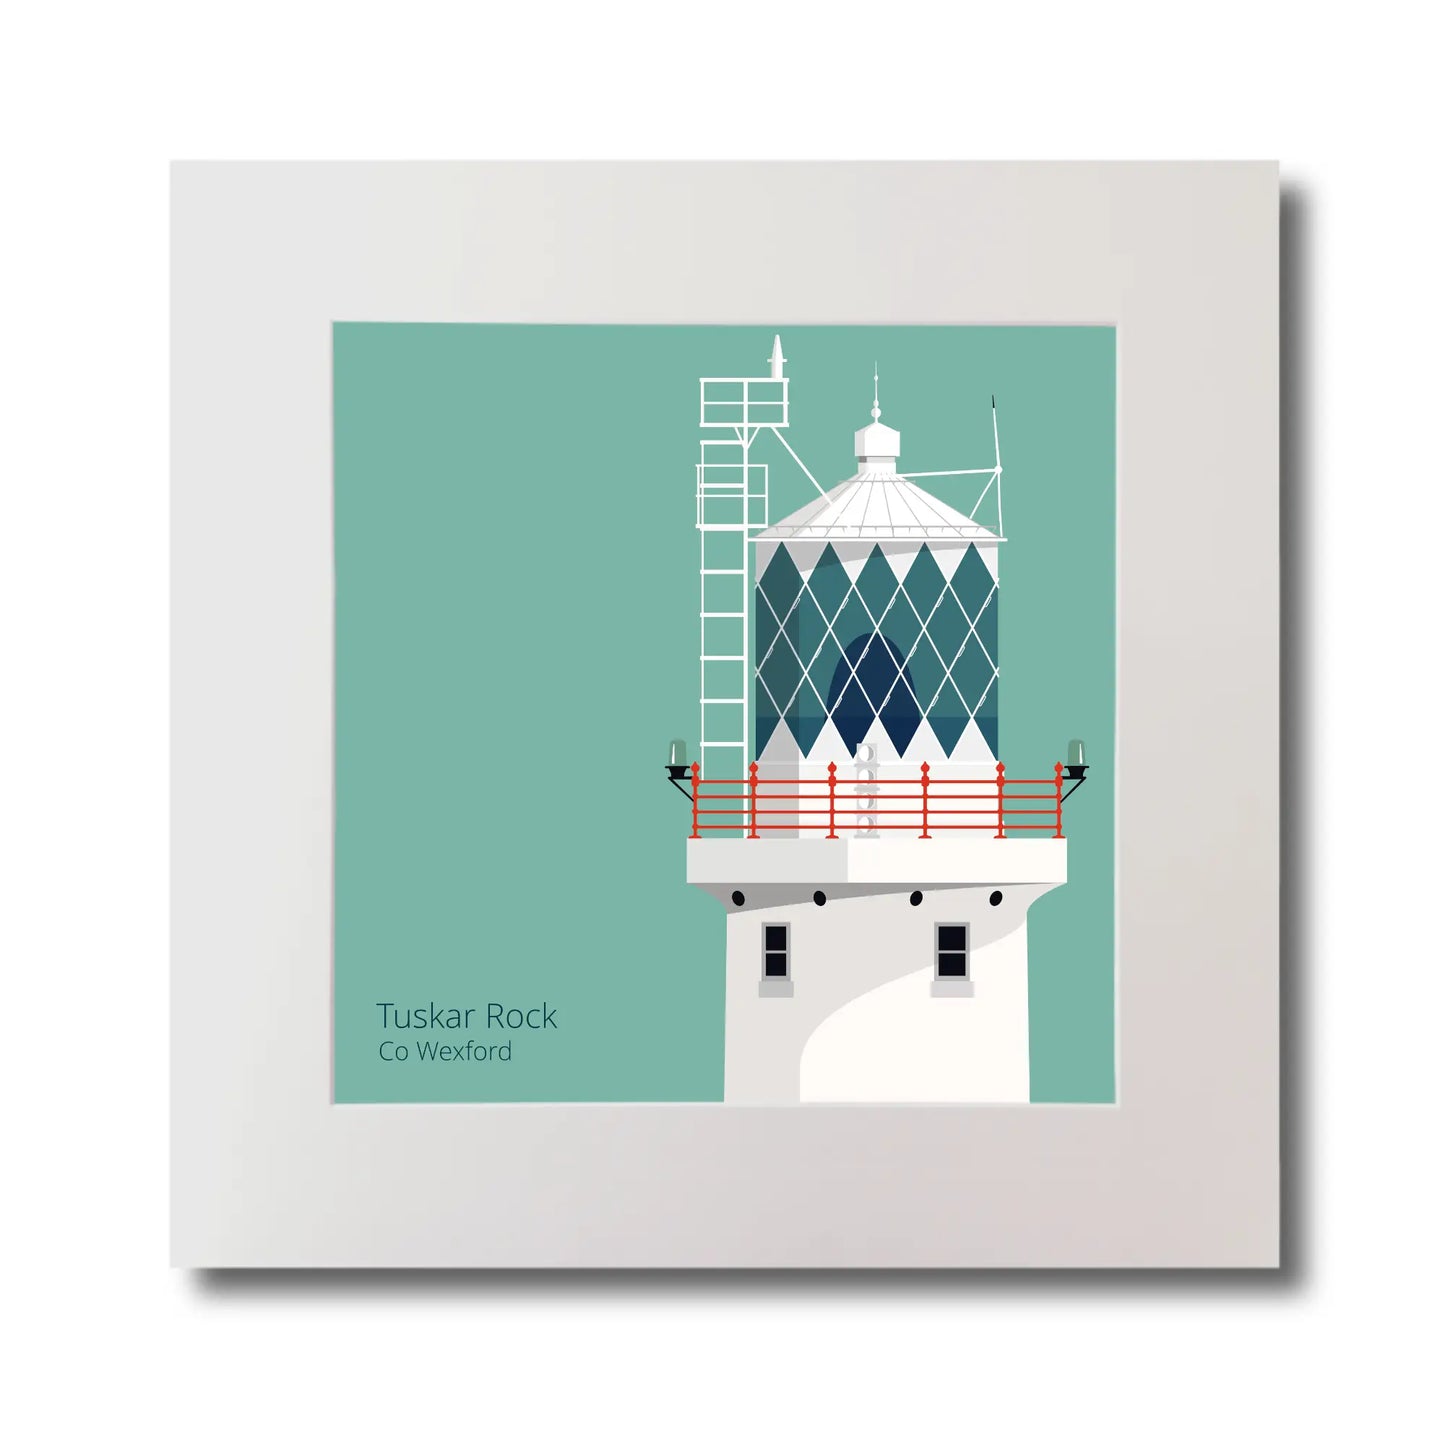 Illustration of Tuskar Rock lighthouse on an ocean green background, mounted and measuring 30x30cm.